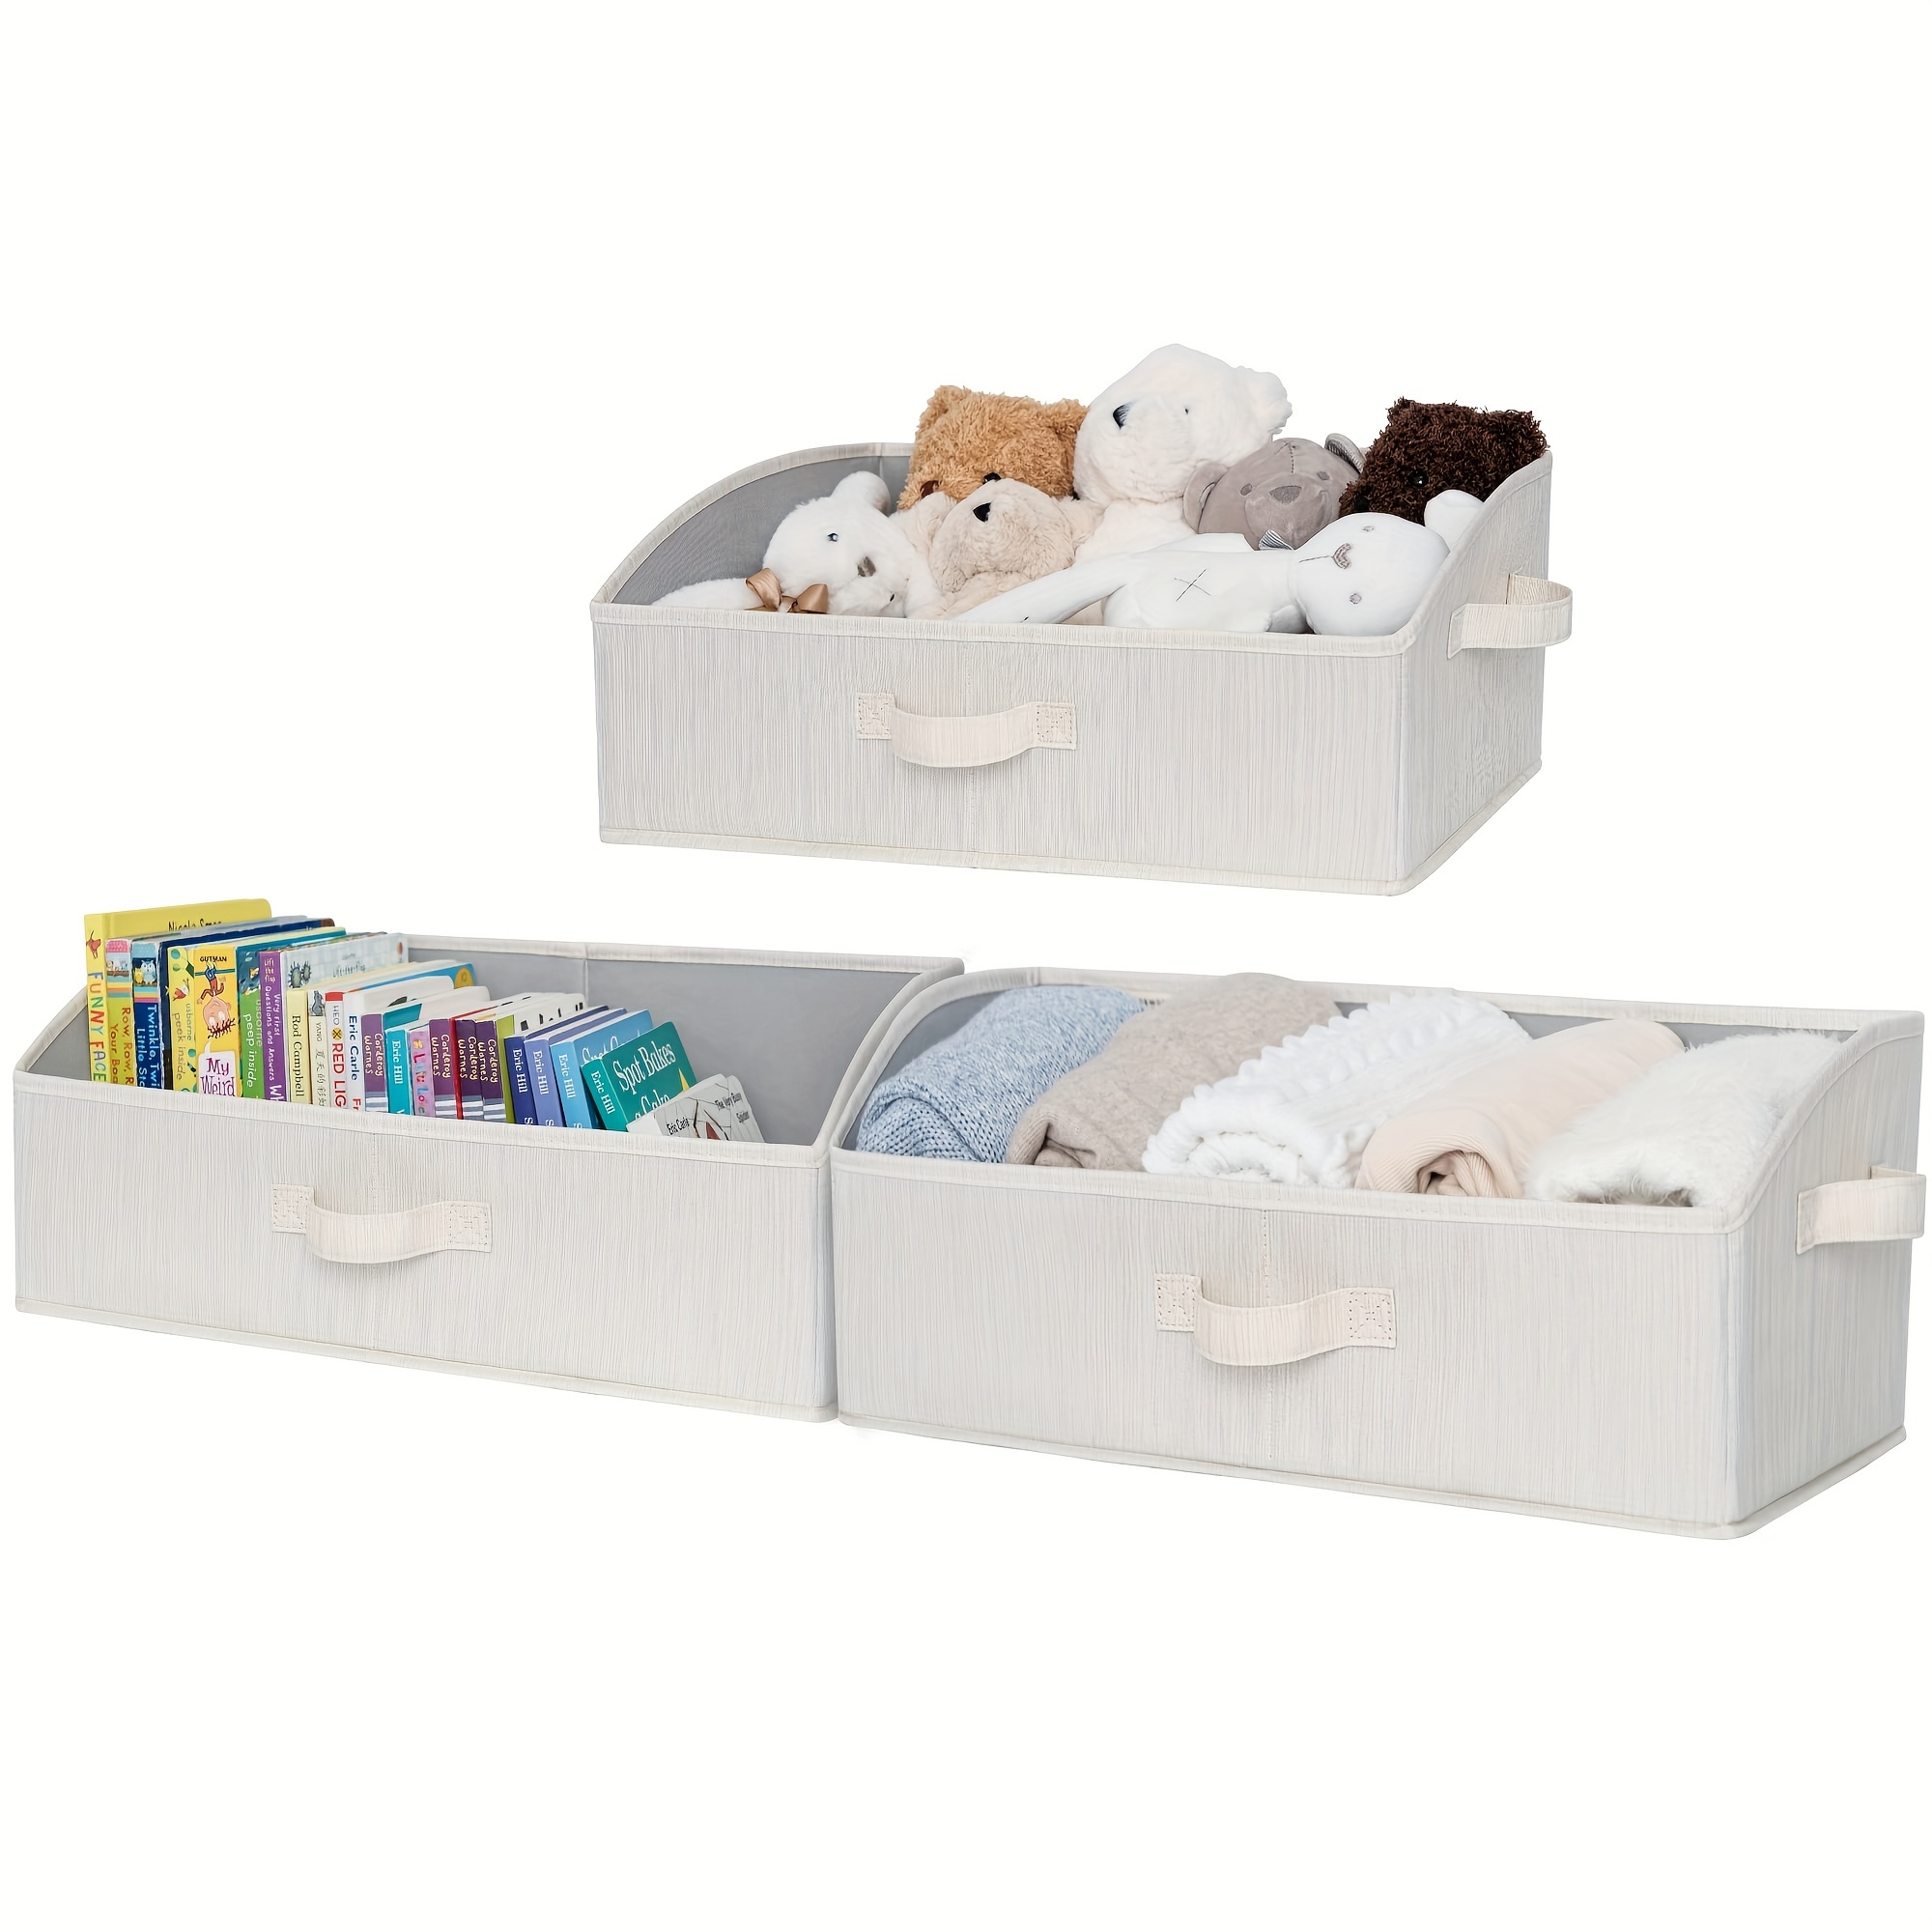 Closet Storage Bins With Clear Window And 2 Handles, Foldable Clothing Bins  For Shelves, Fabric Organizer, Storage Containers For Organizing Clothing,  Jeans, Toys, Books, Shelves, Closet, Wardrobe - Closet Organizers And  Storage